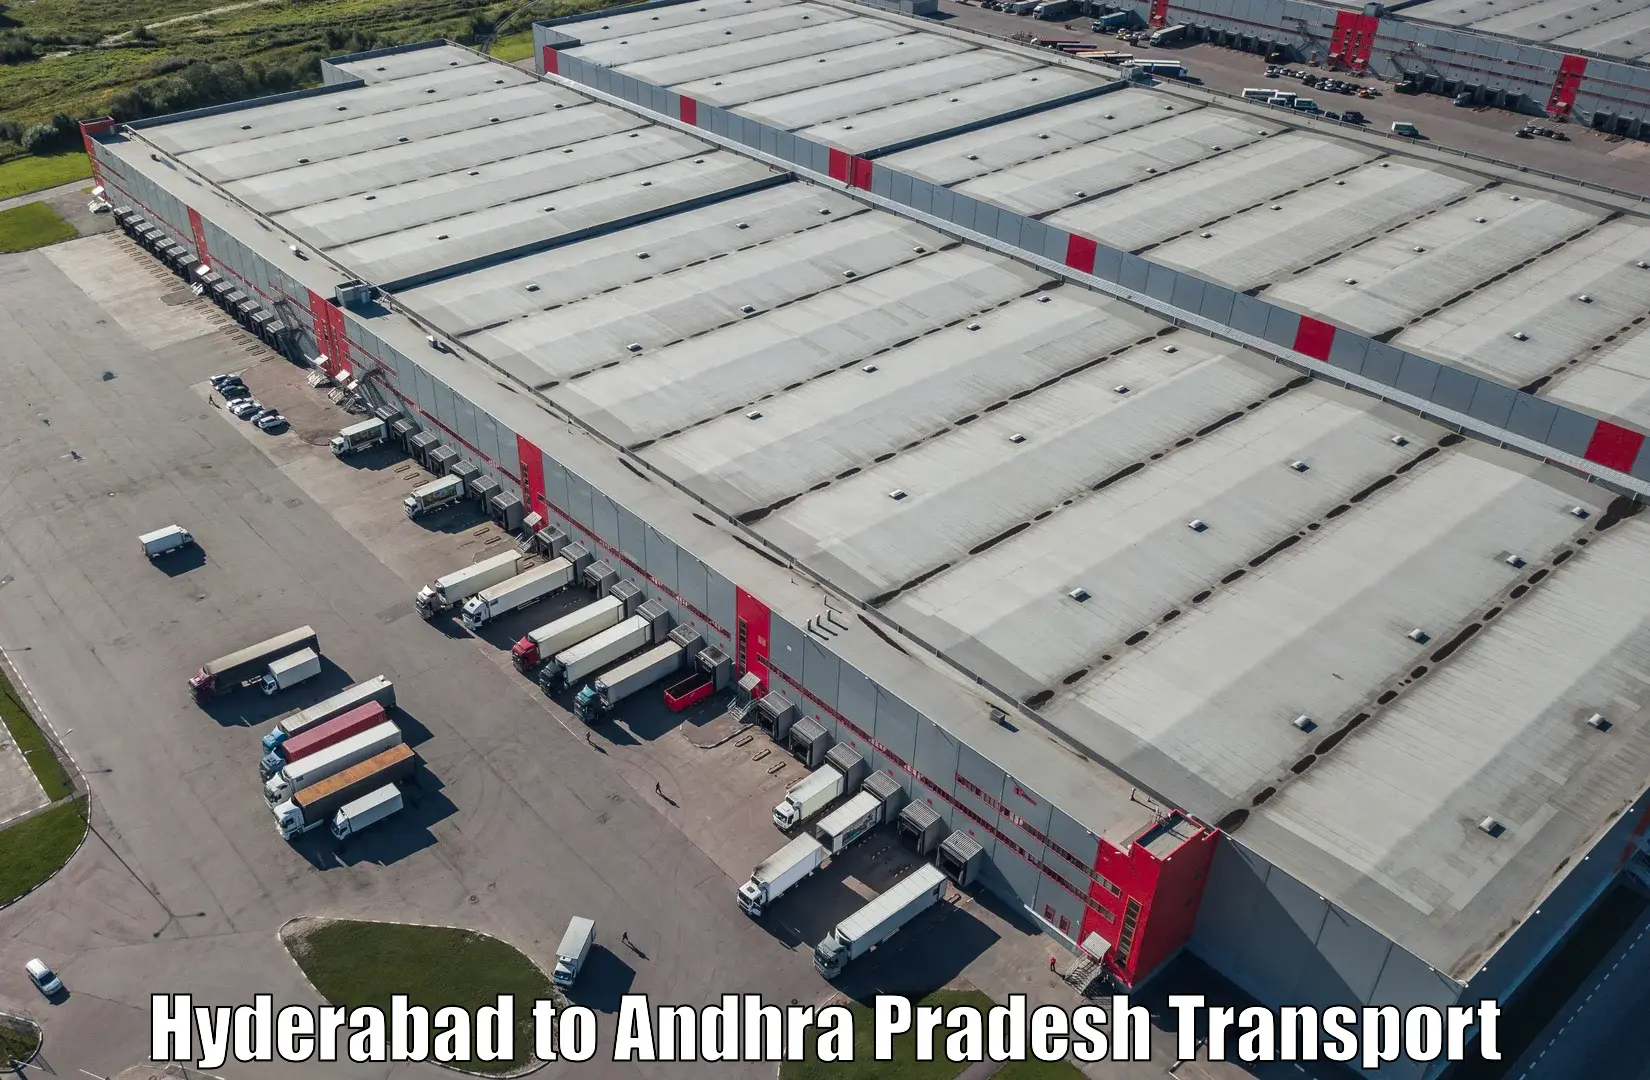 Land transport services in Hyderabad to Kadapa